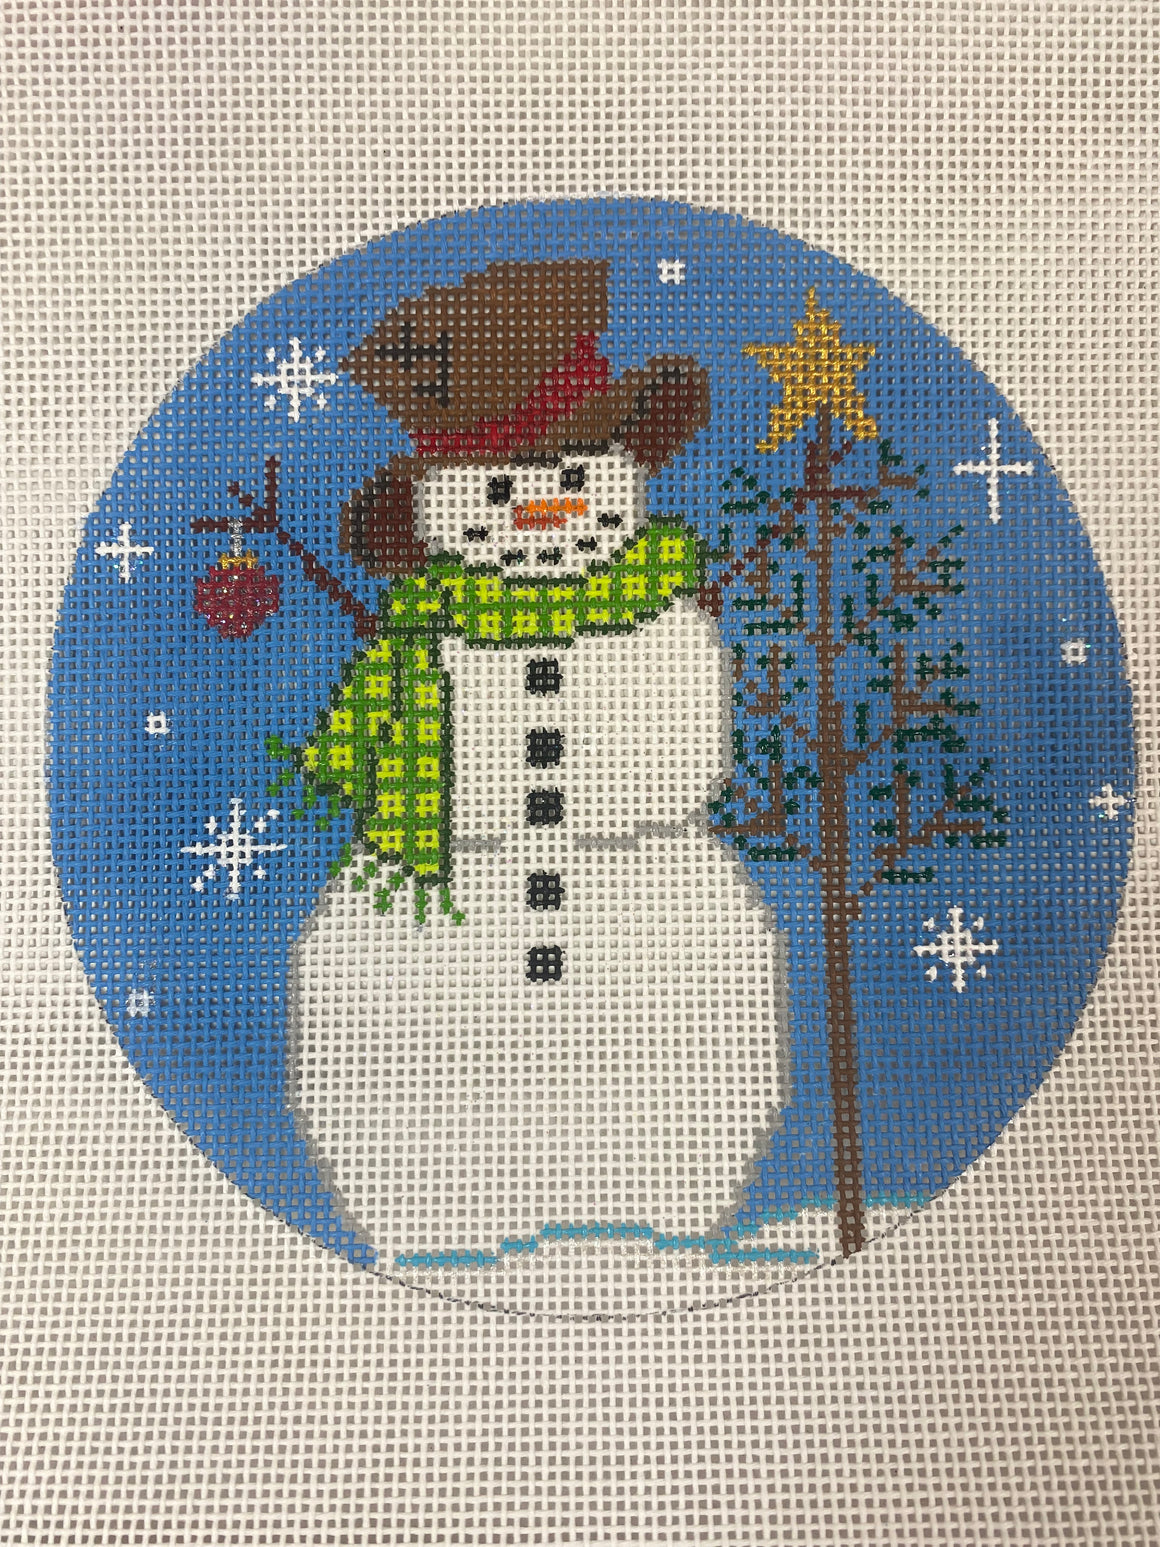 Snowman with Tophat